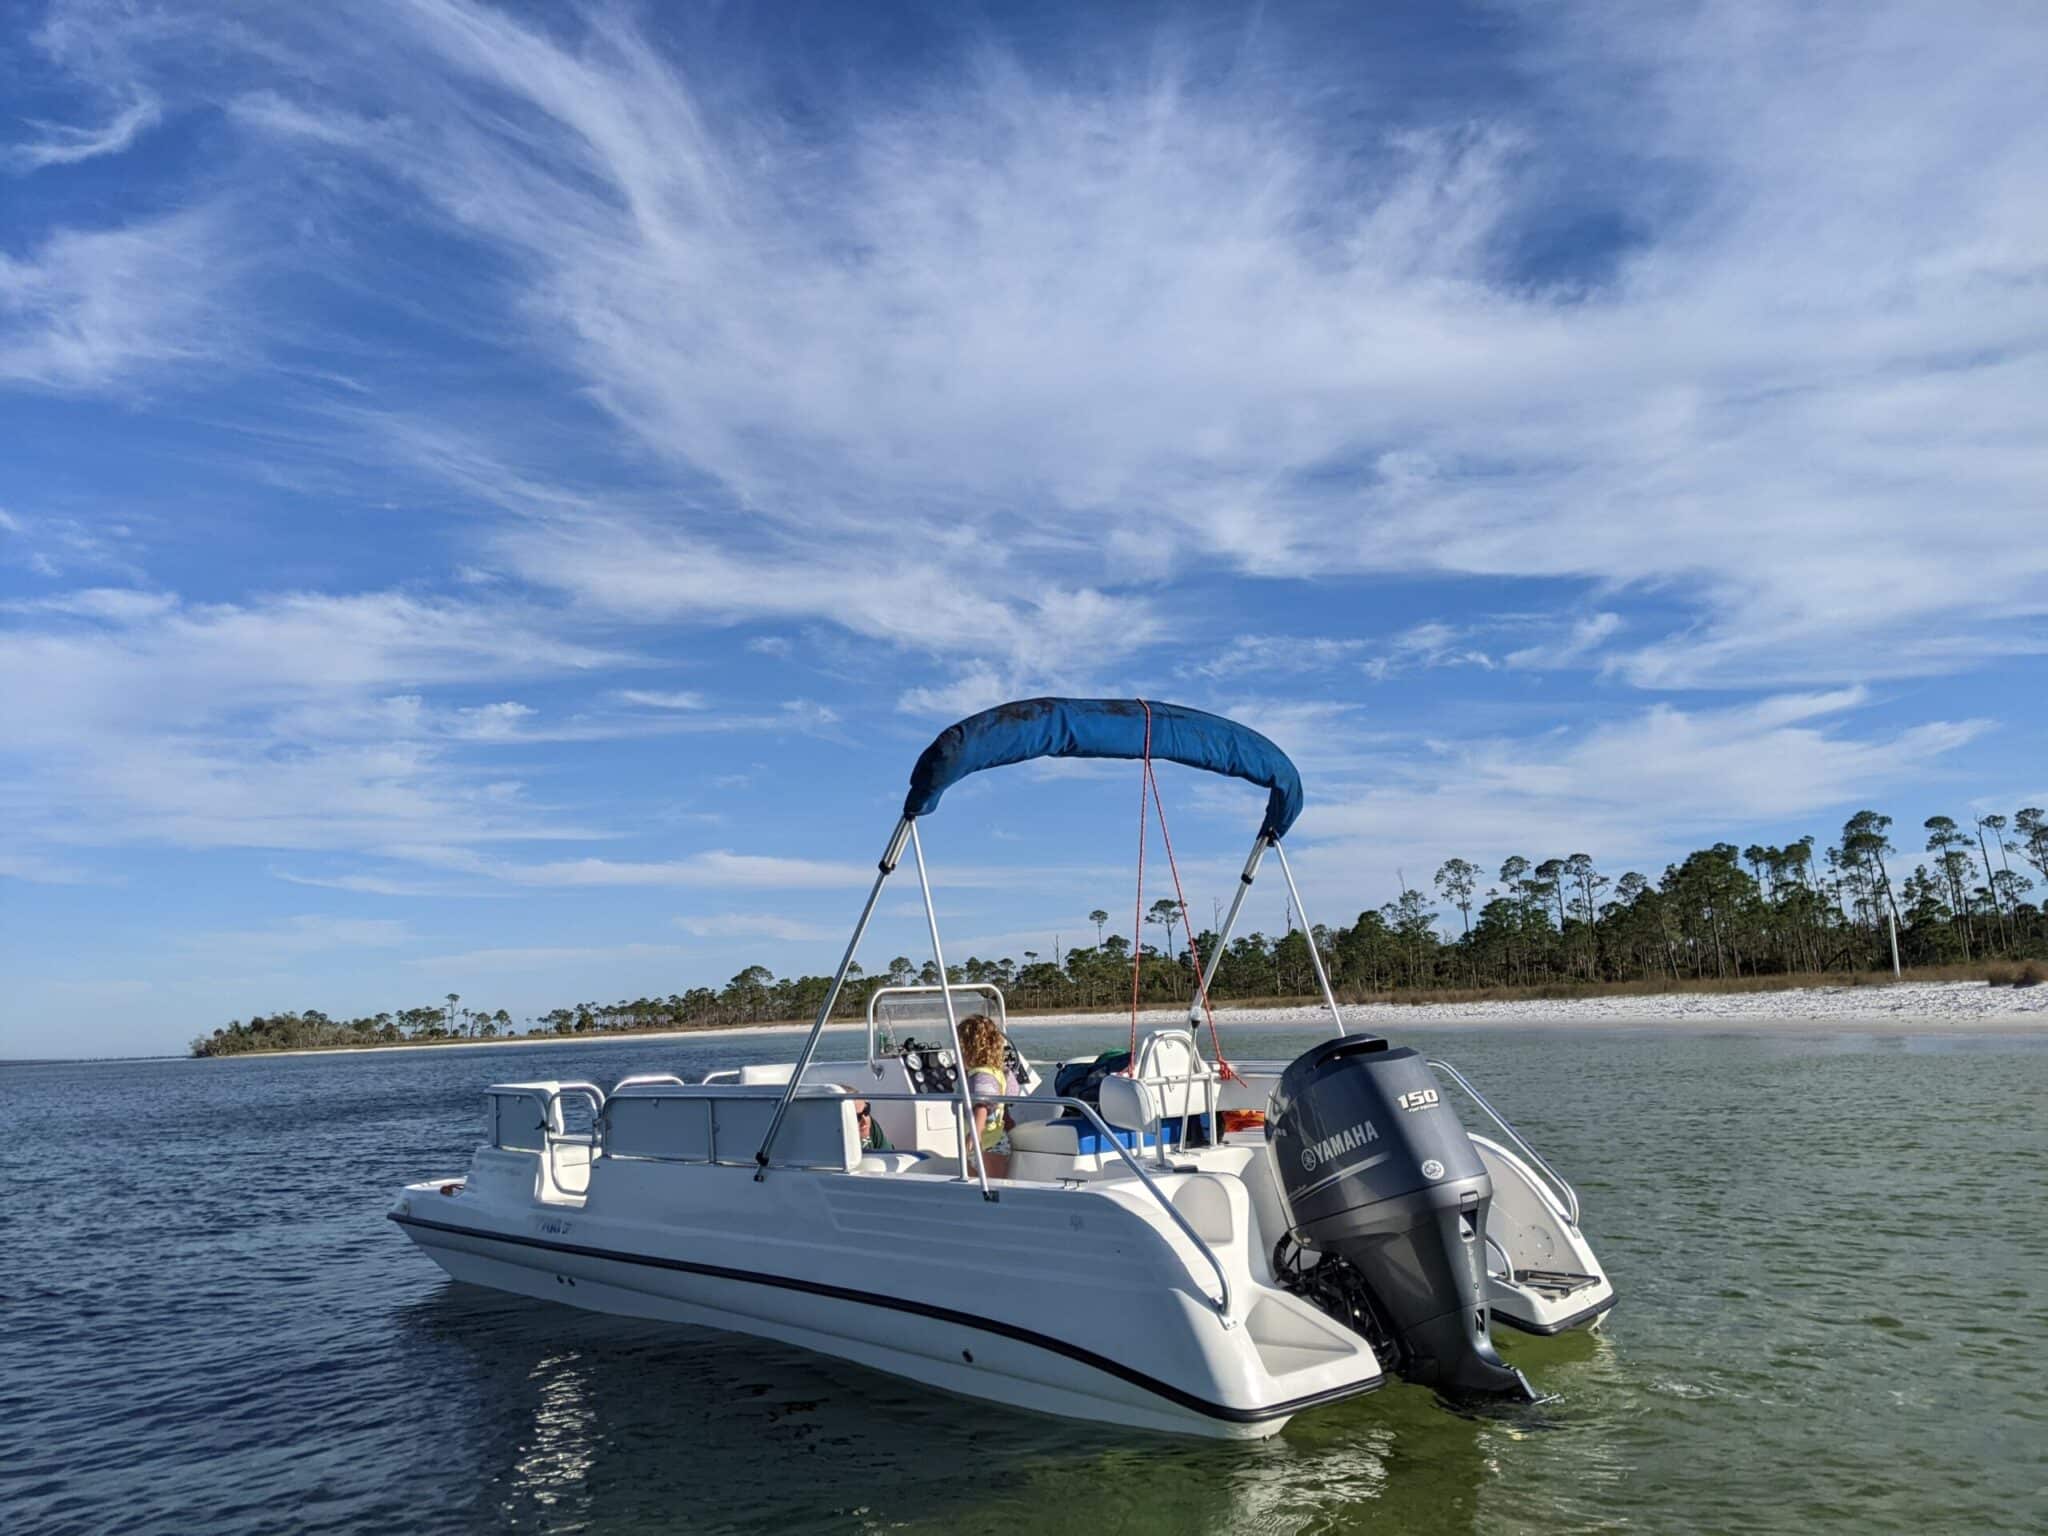 Flippin' Awesome Adventures Boat Tours in the Gulf of Mexico | Panama City Beach, Florida Dolphin Tours, Snorkeling Excursions, & Boat Trips led by Captain Chris, a marine biologist